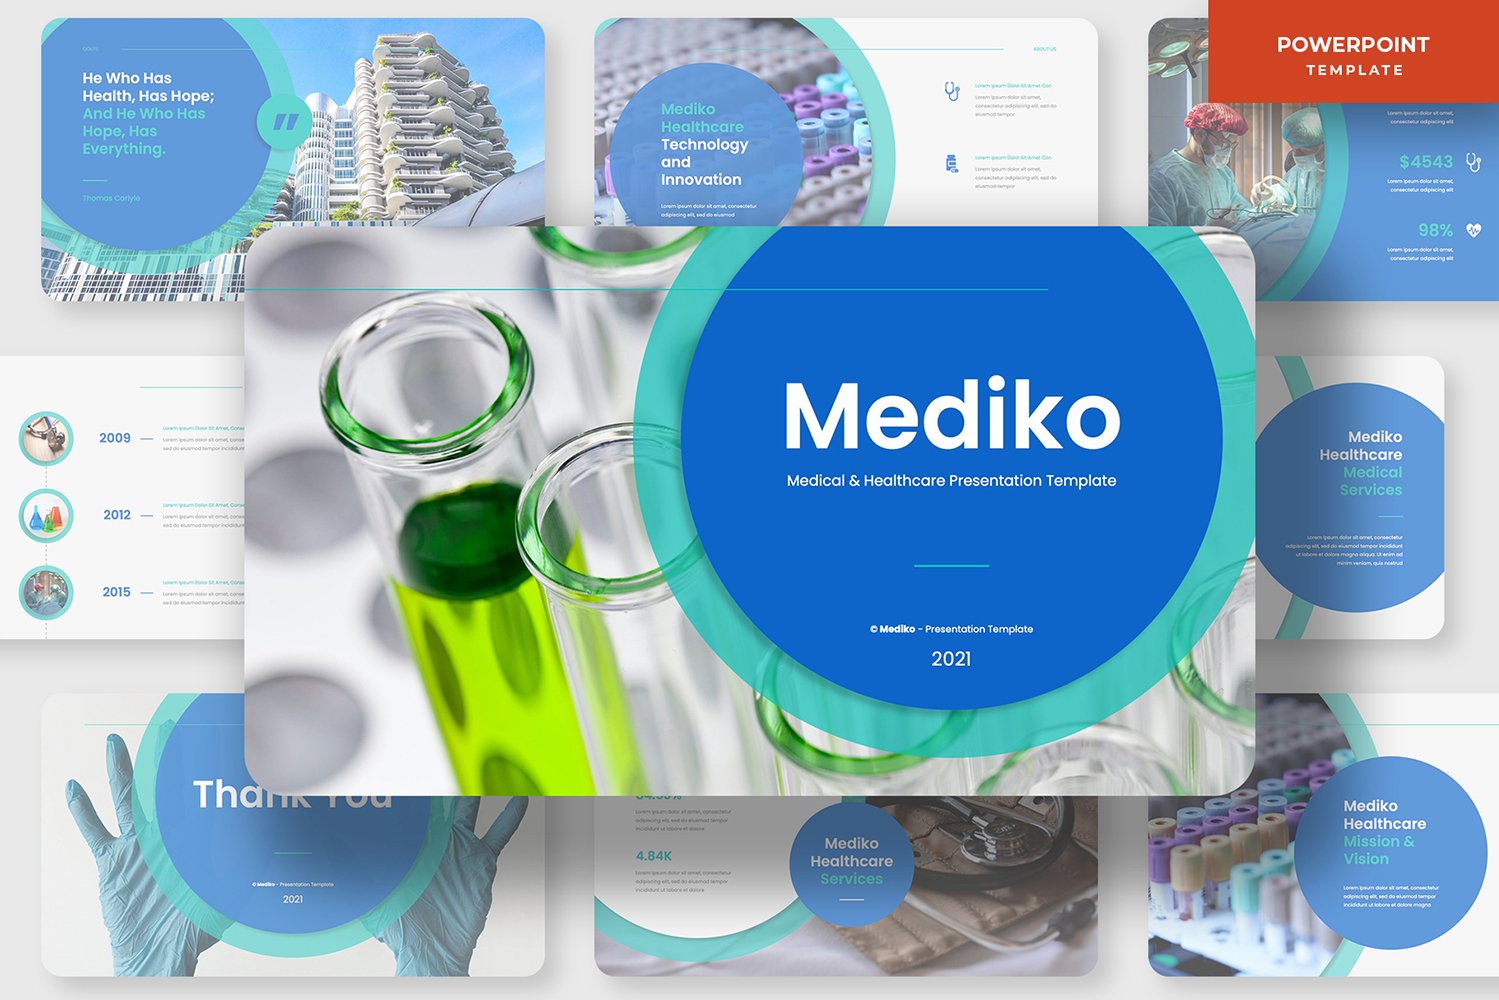 Mediko - Medical & Healthcare Business PowerPoint Template